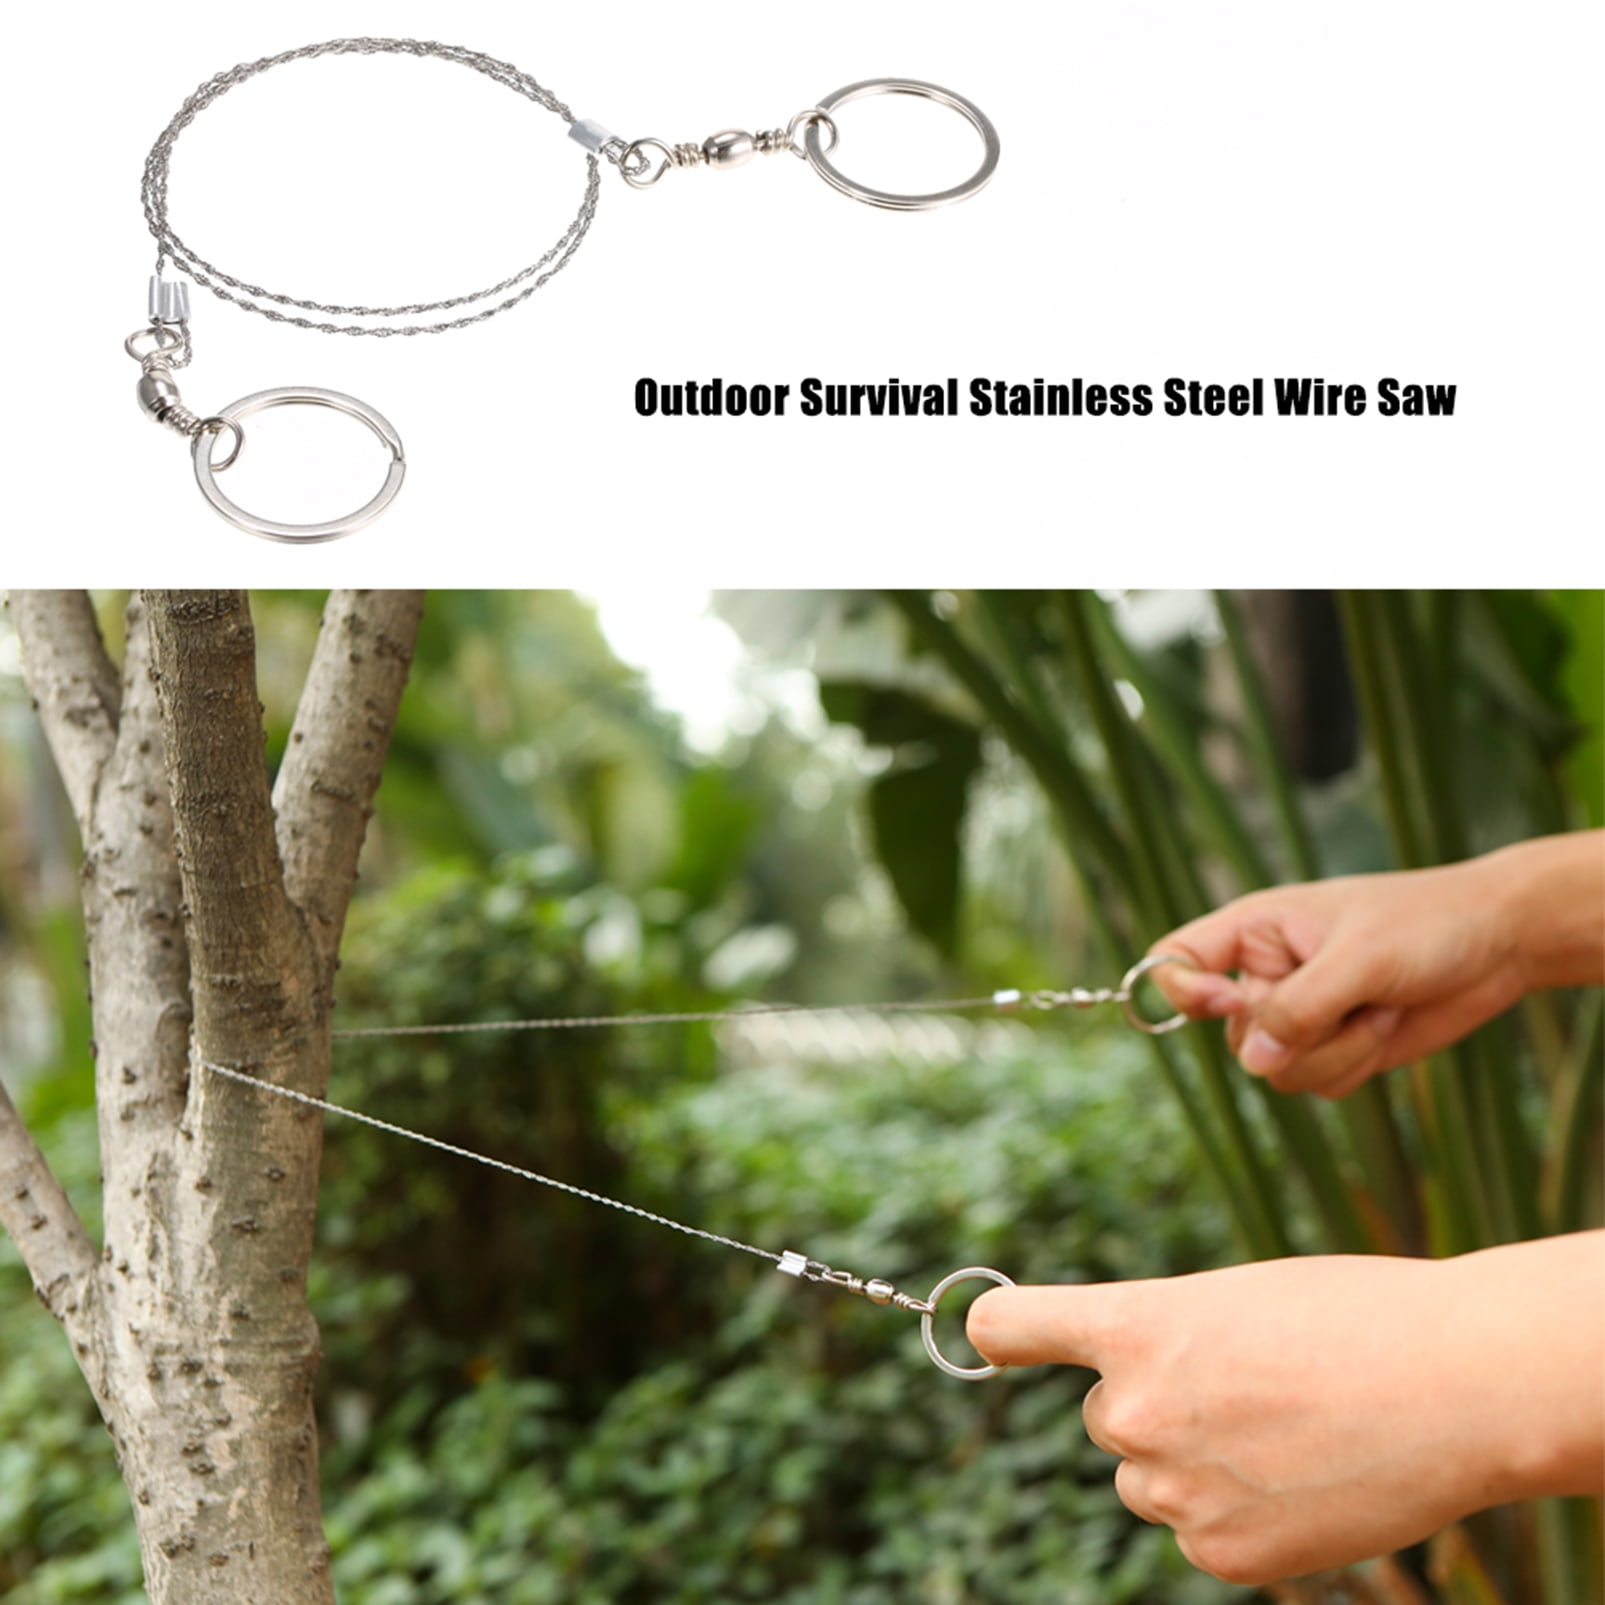 Lightweght Stainless Steel Wire Saw Outdoor Survival Tool Kit Survival Saw GeaHK 